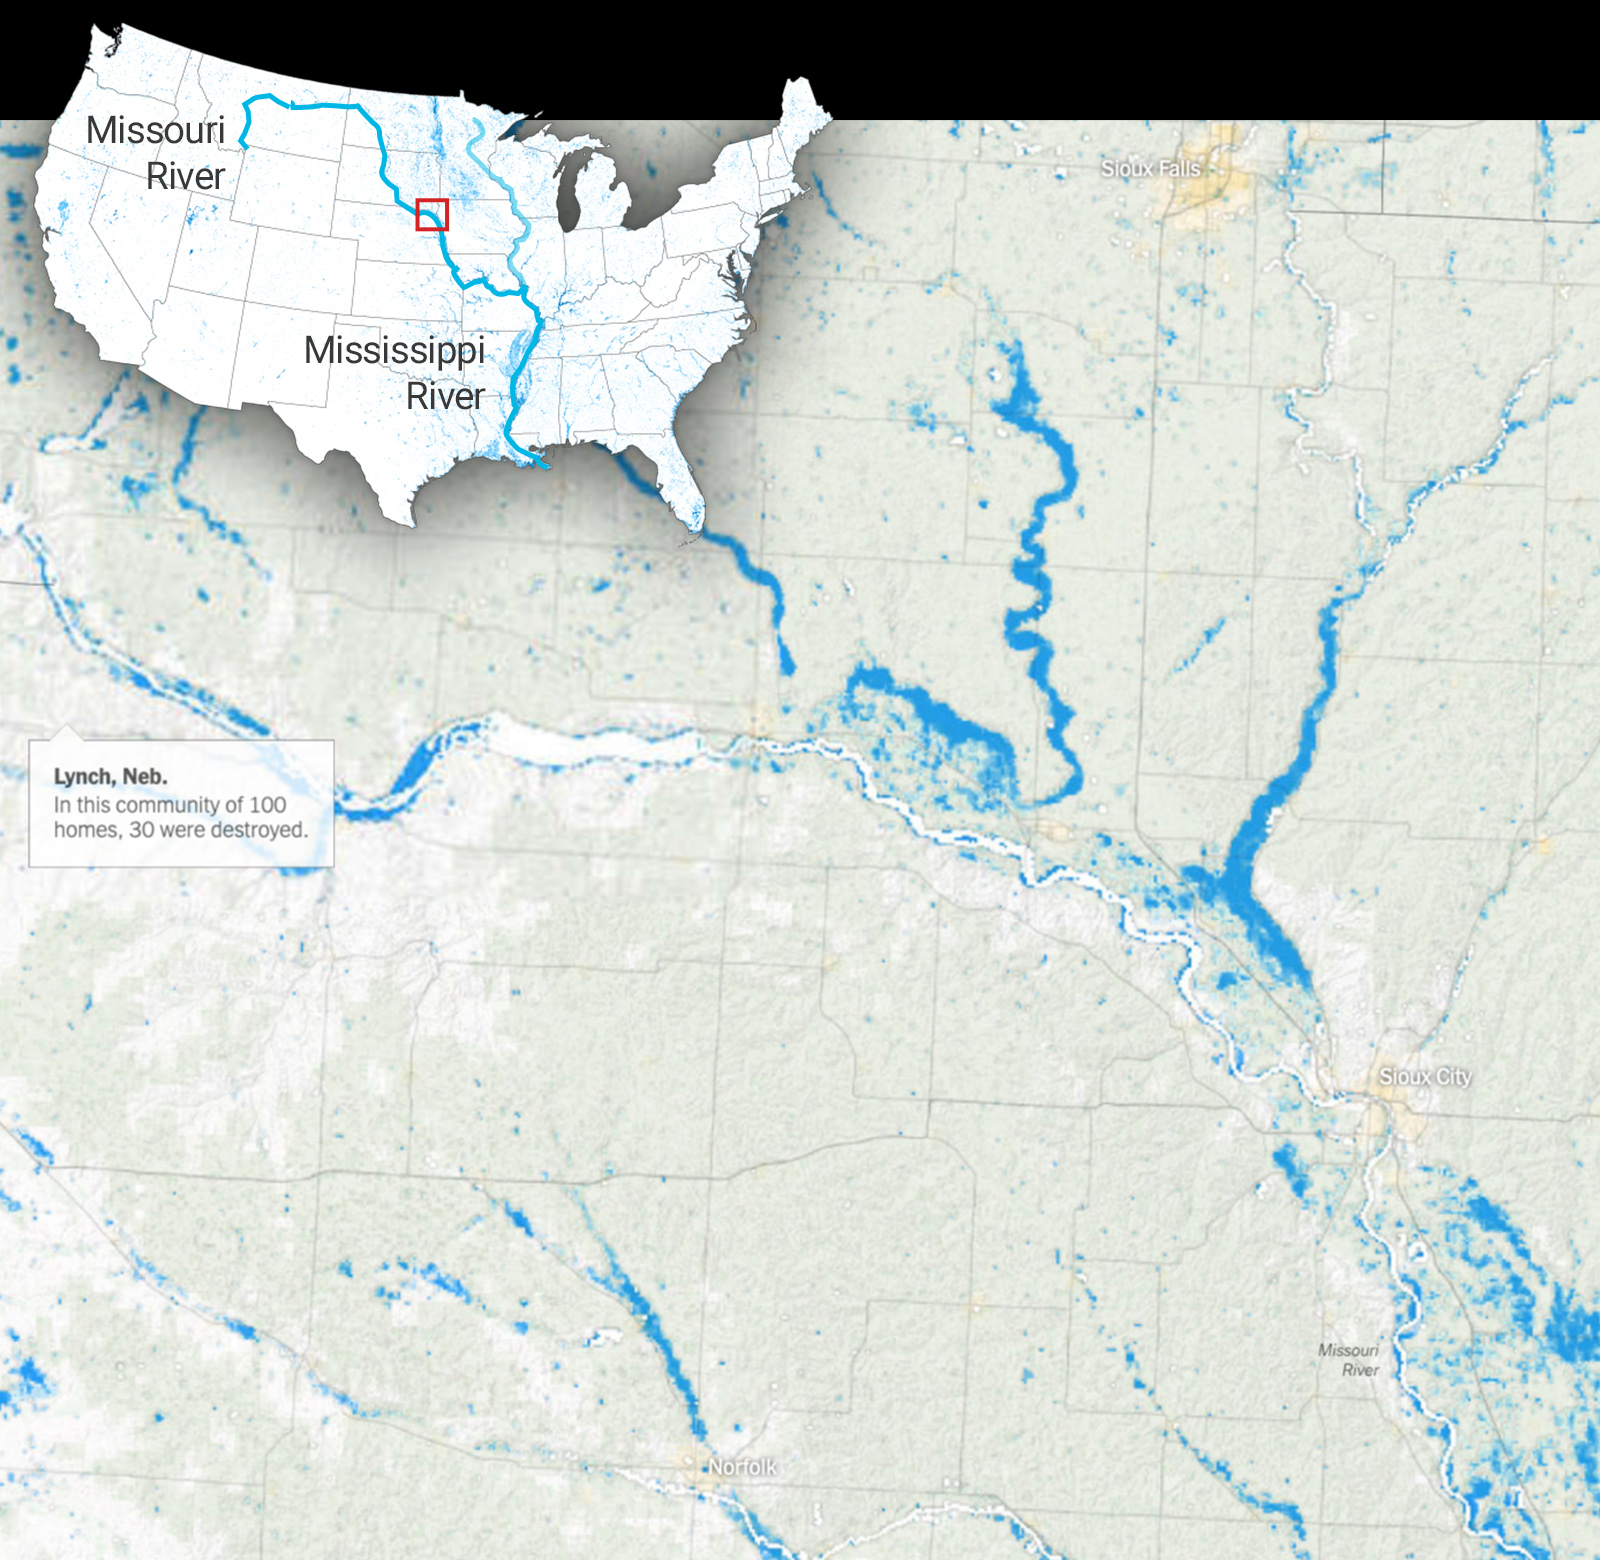 A graphic shows the extent of river flooding along the Missouri and Mississippi Rivers in 2019. The image focuses on a portion of Nebraska around the town of Lynch, showing flood waters in blue against a white backdrop. In the upper left corner, a U.S. map indicates which portion of the country the larger graphic focuses on.